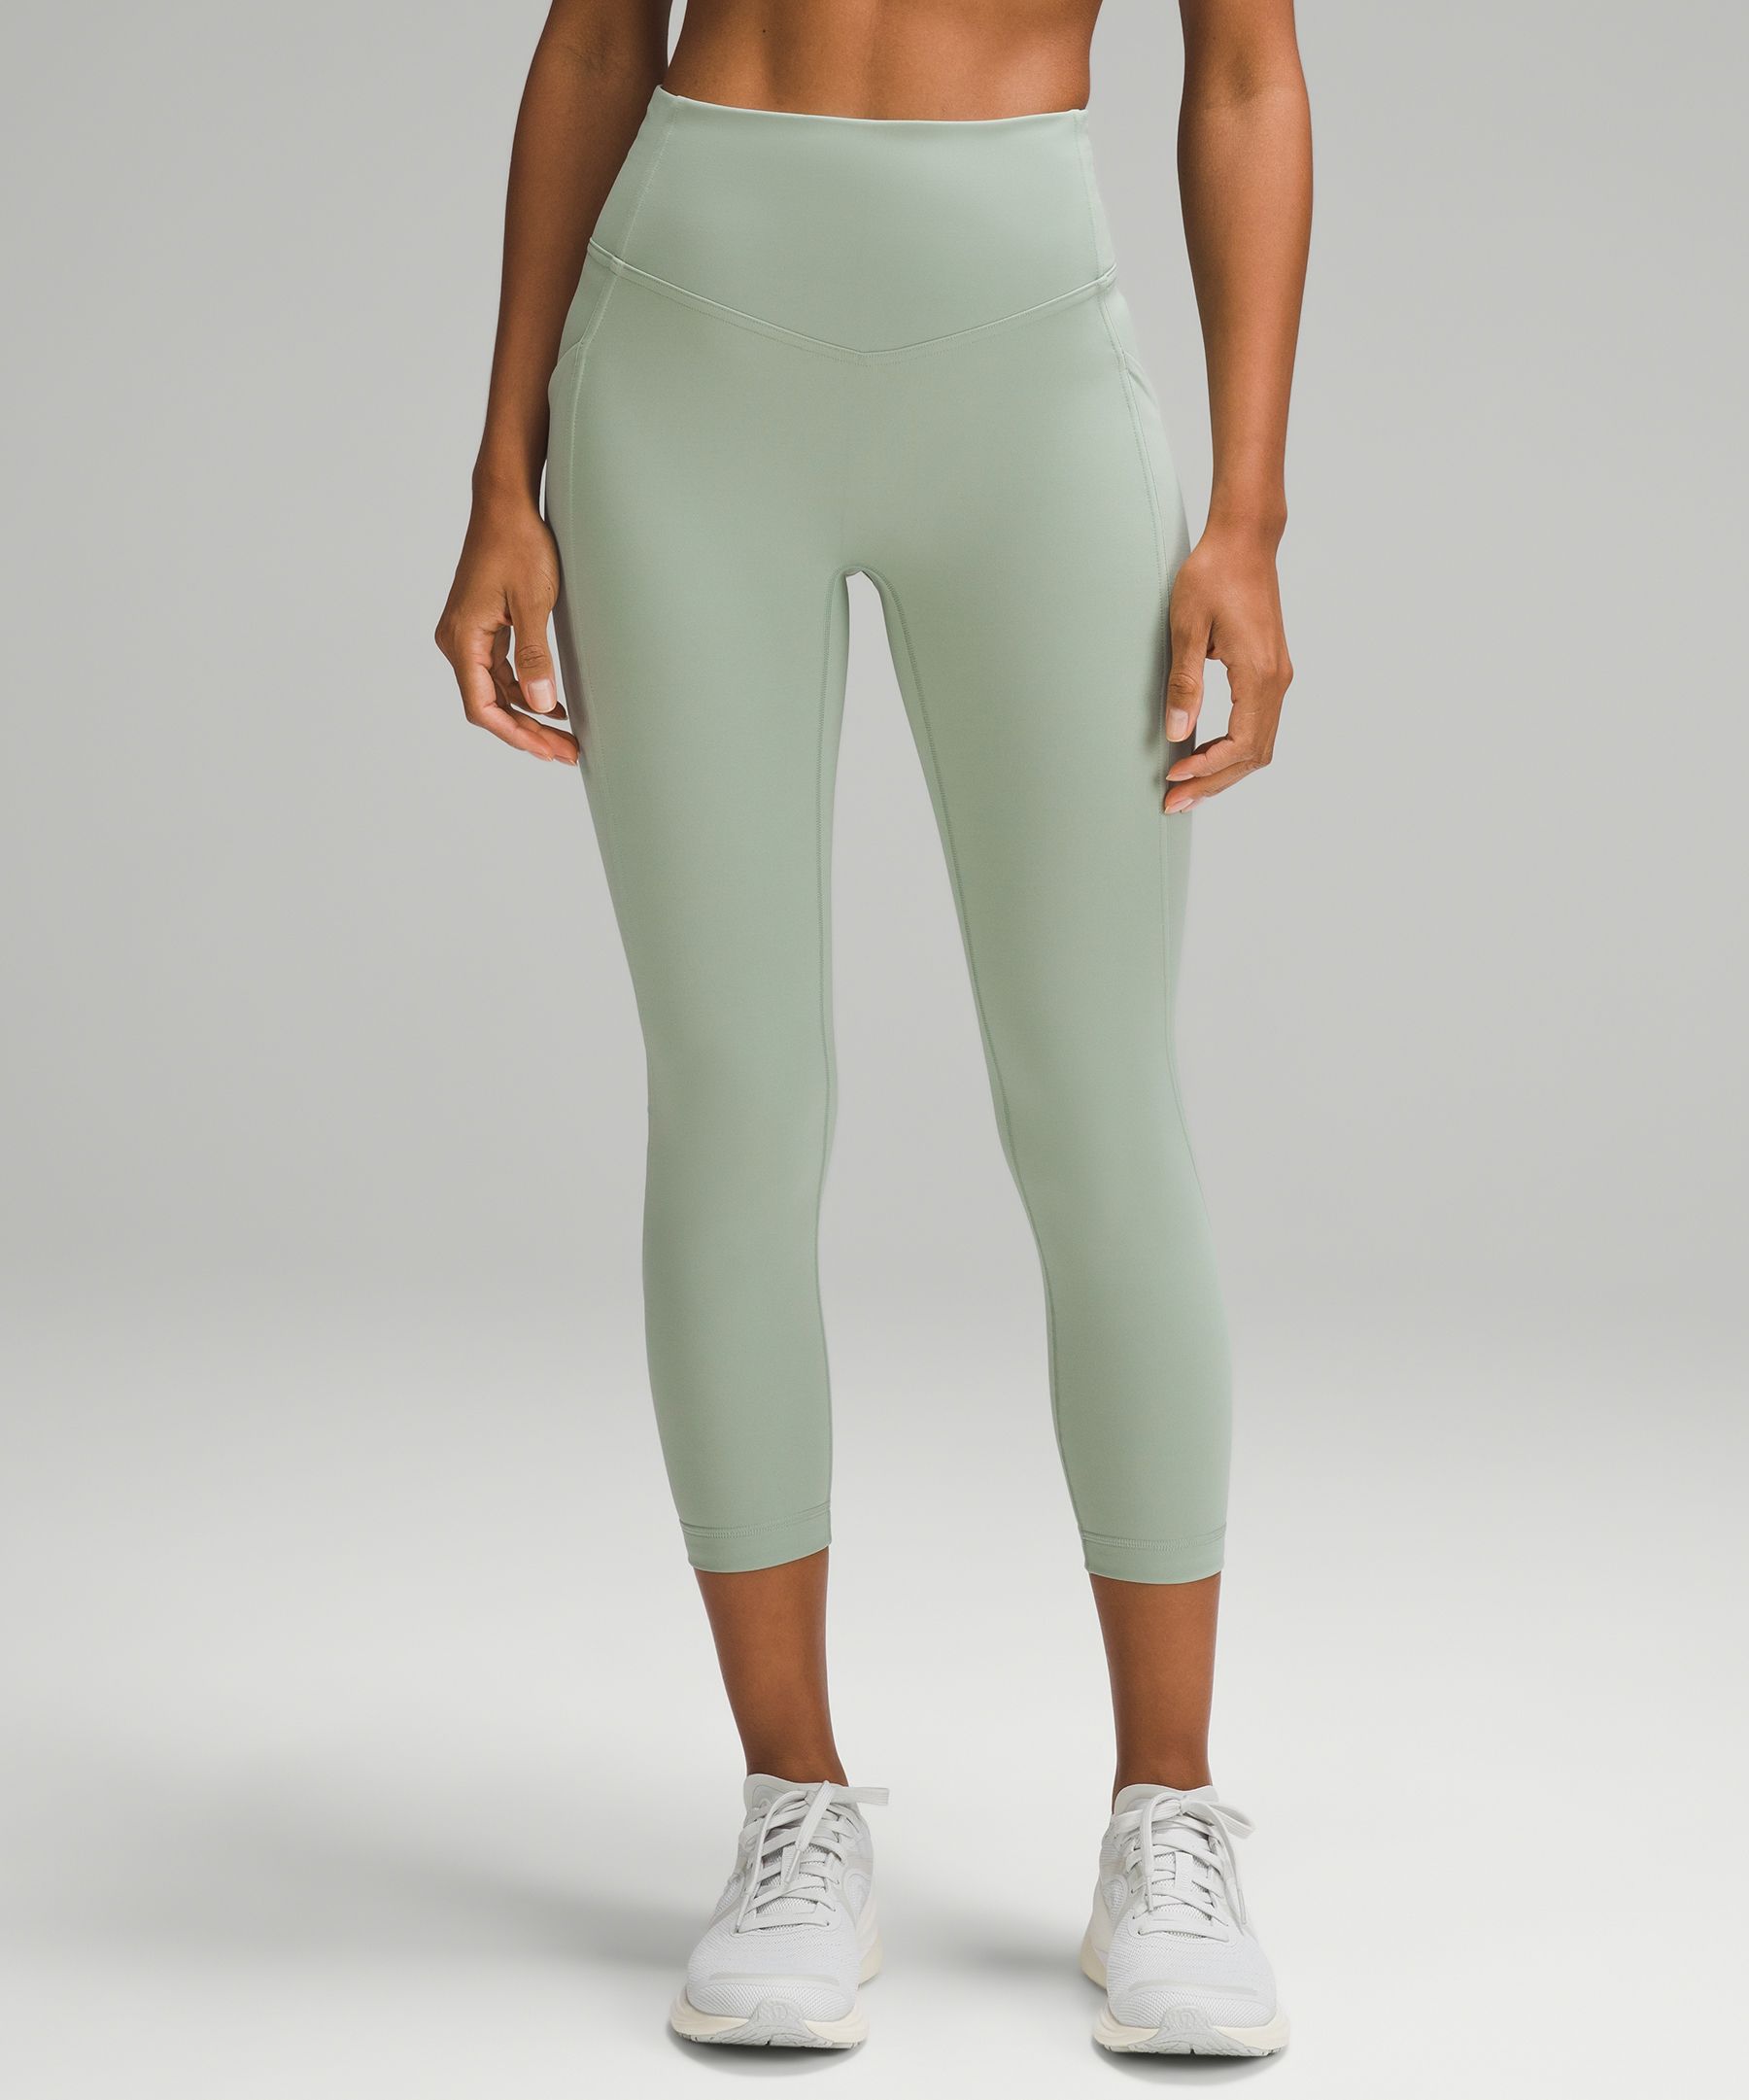 Lululemon Athletica Run Stay On Course Cropped Leggings Size 6